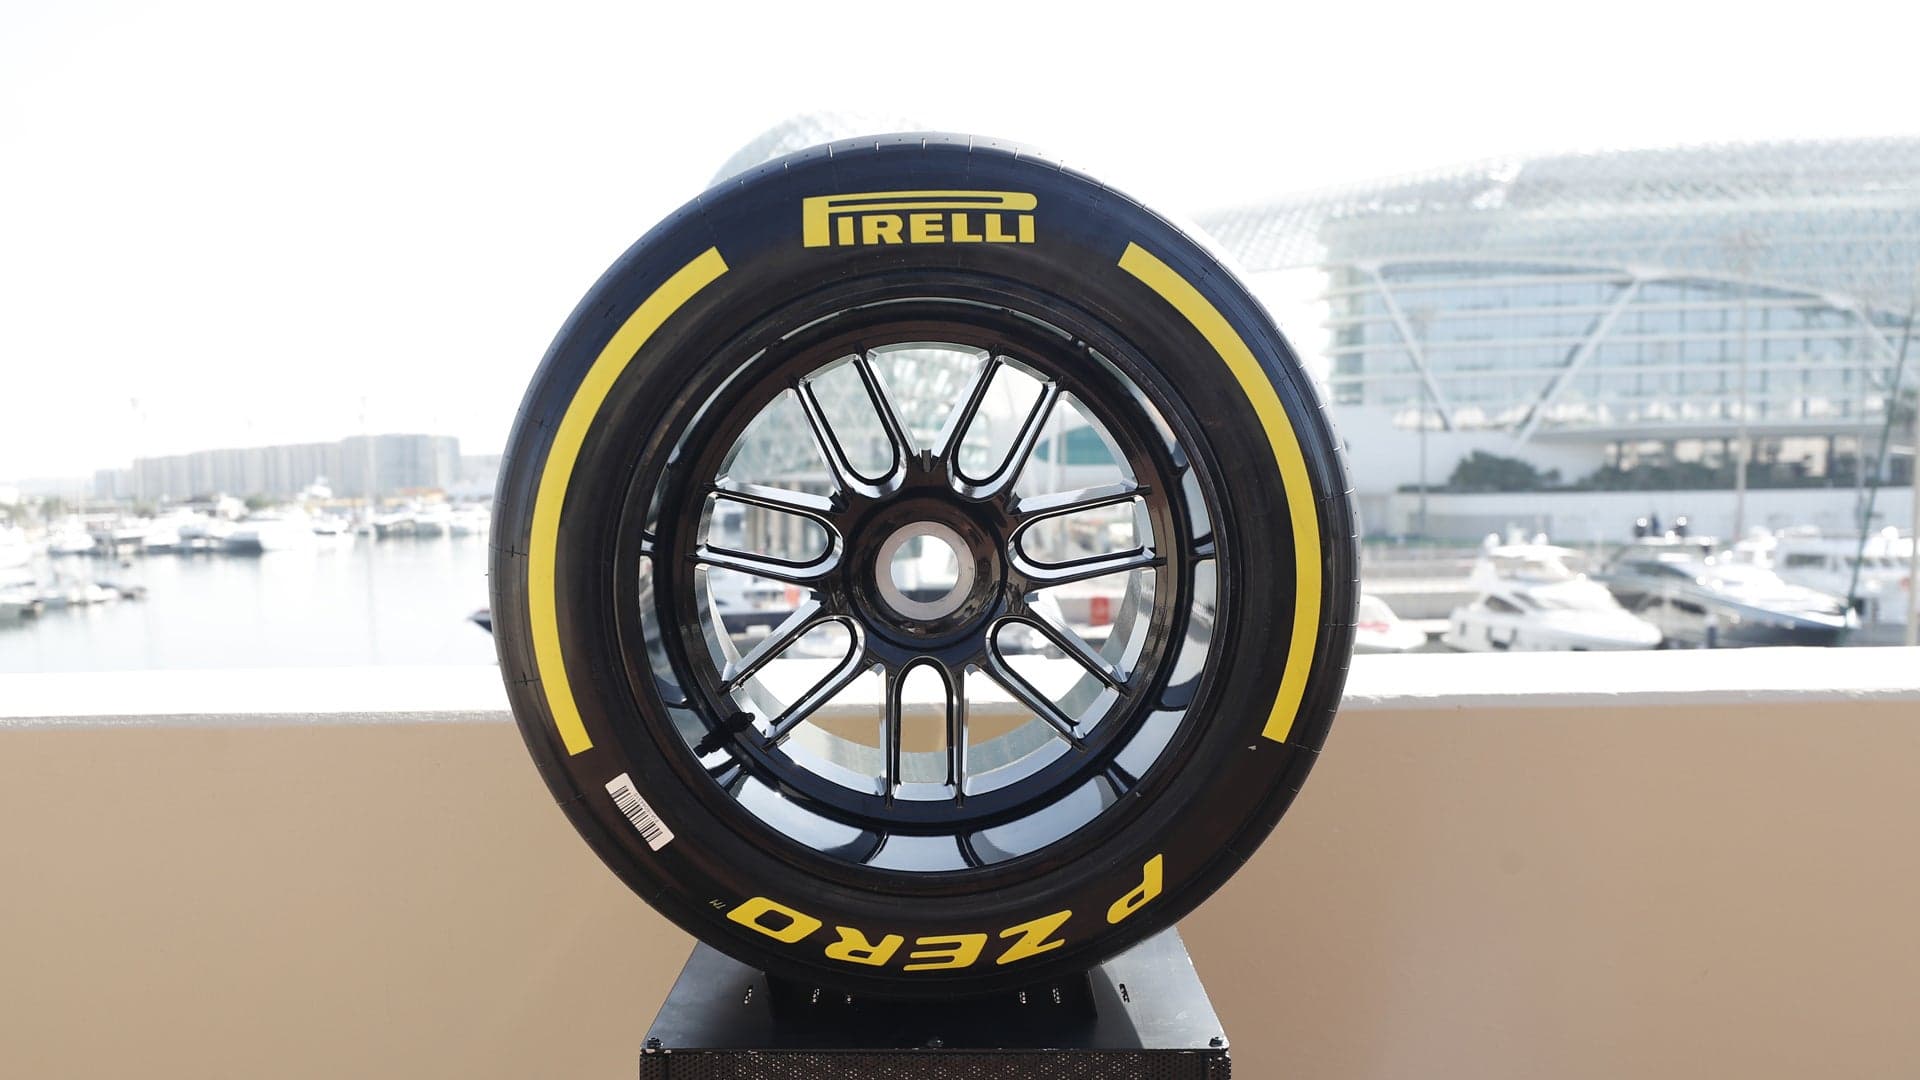 Pirelli Thinks It Has Fixed F1’s Tire Issues for 2022